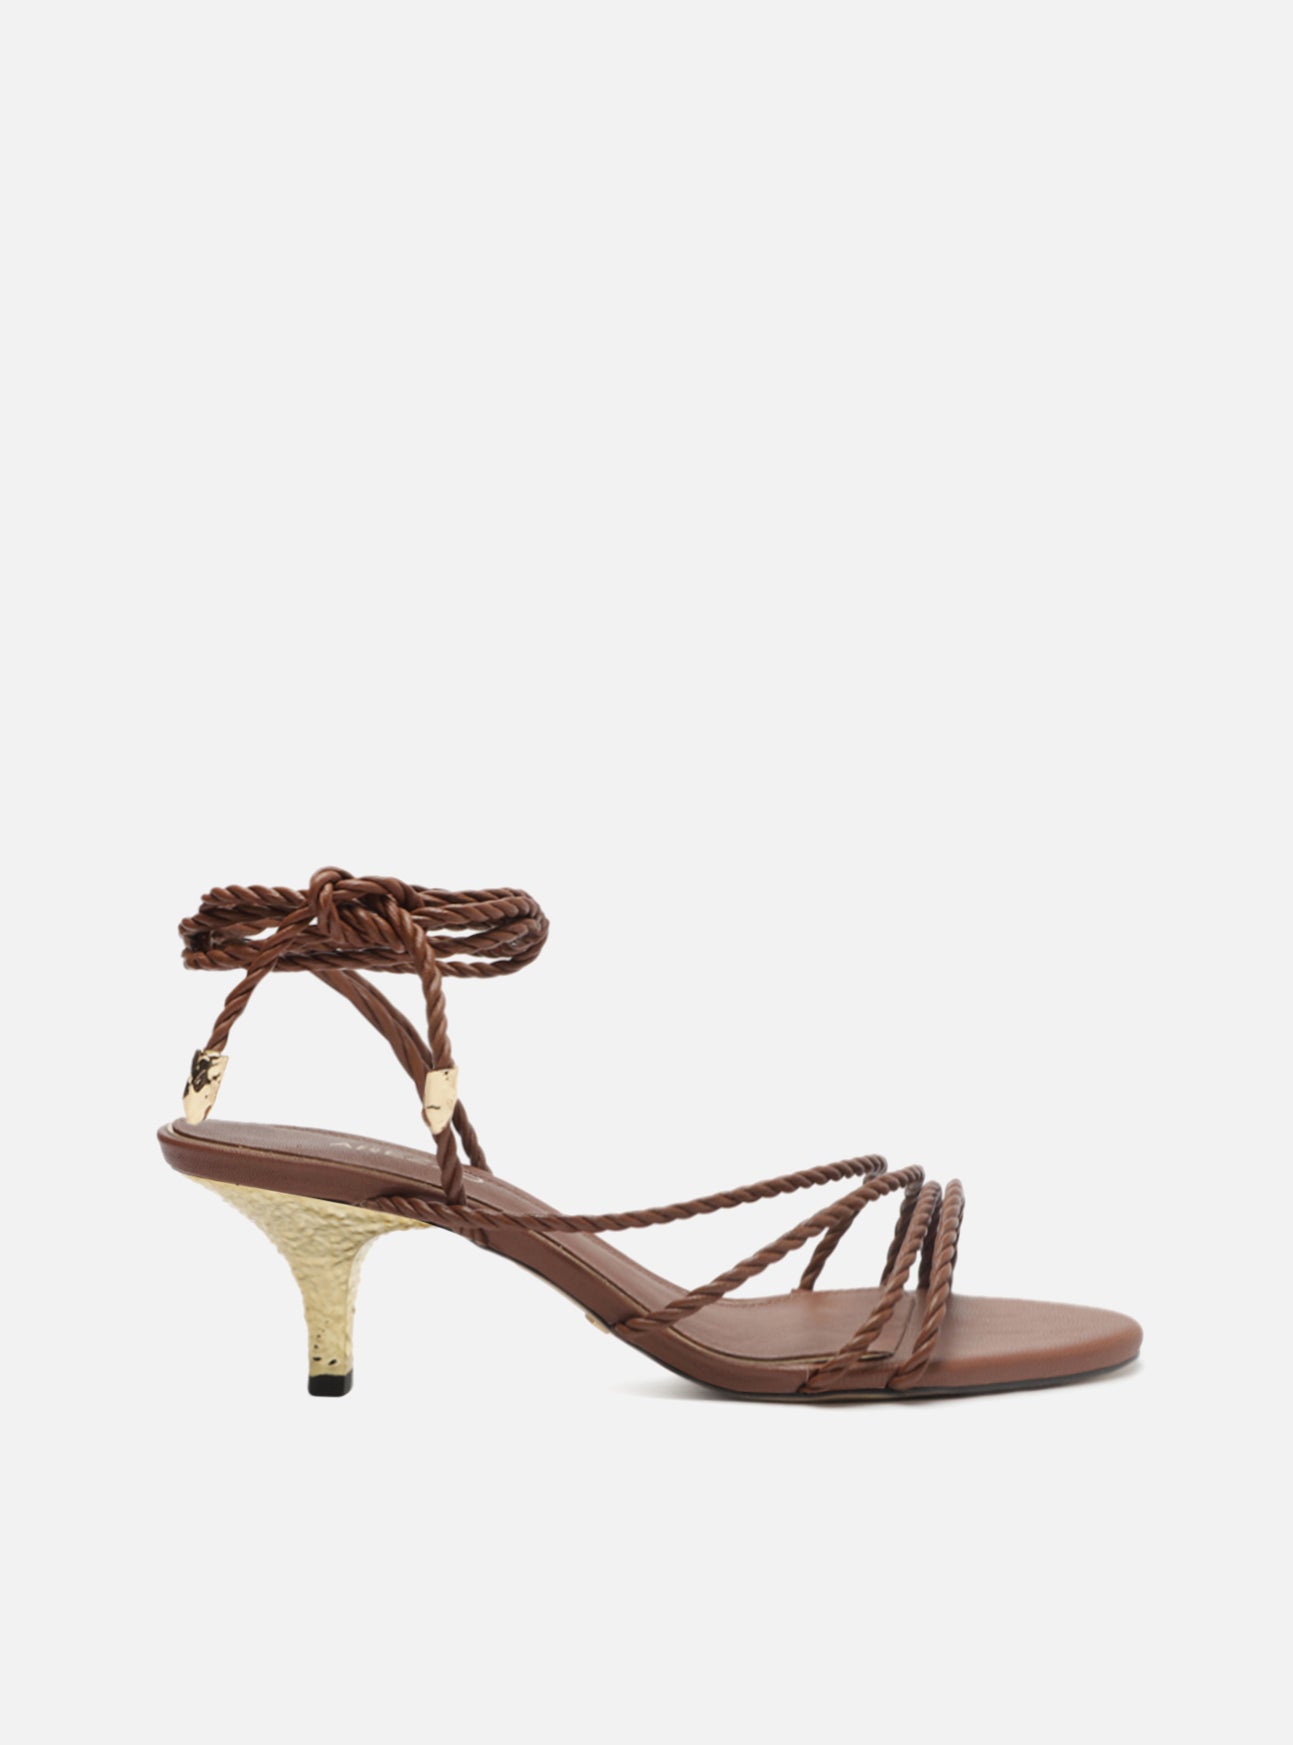 Arezzo Sandals: Block, Heeled, Flat, Stiletto Sandals and more